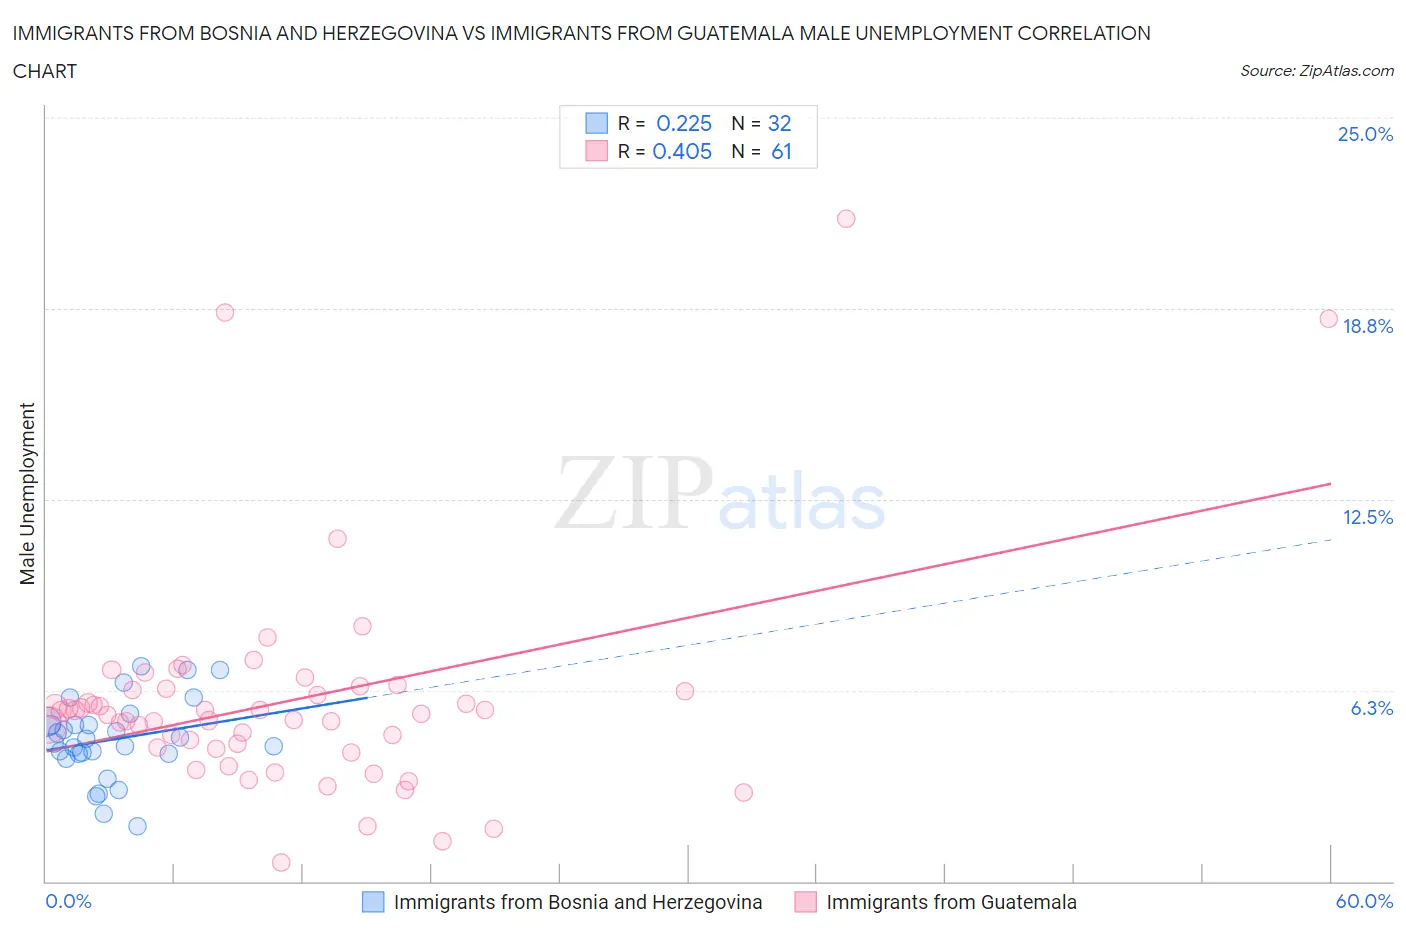 Immigrants from Bosnia and Herzegovina vs Immigrants from Guatemala Male Unemployment